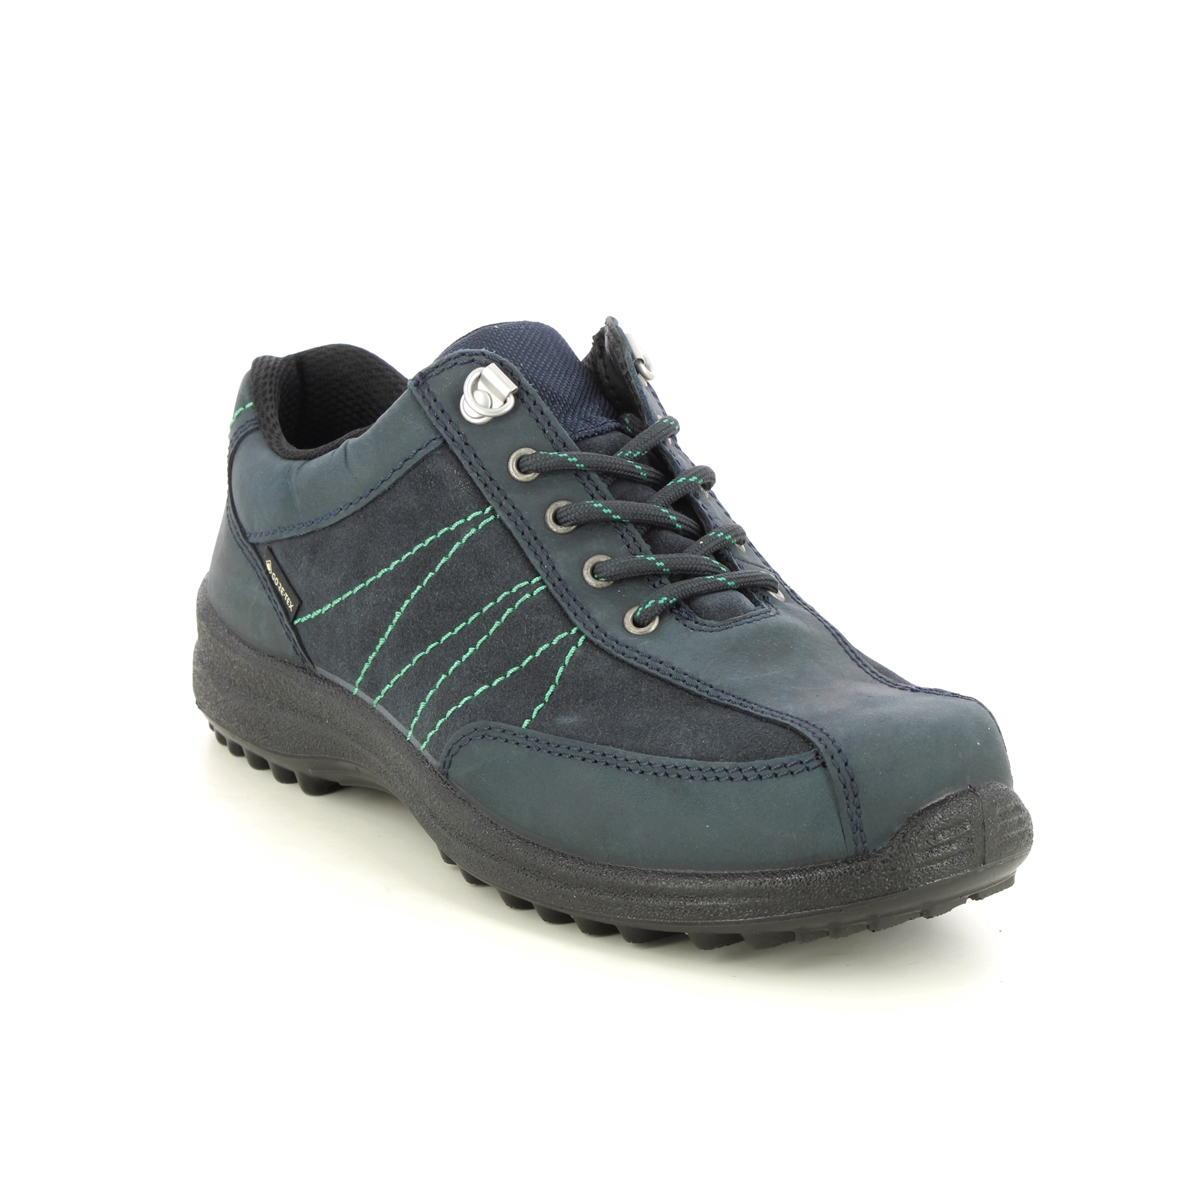 Hotter Mist Gtx Extra Wide Navy leather Womens Walking Shoes 17618-72 in a Plain Leather in Size 6